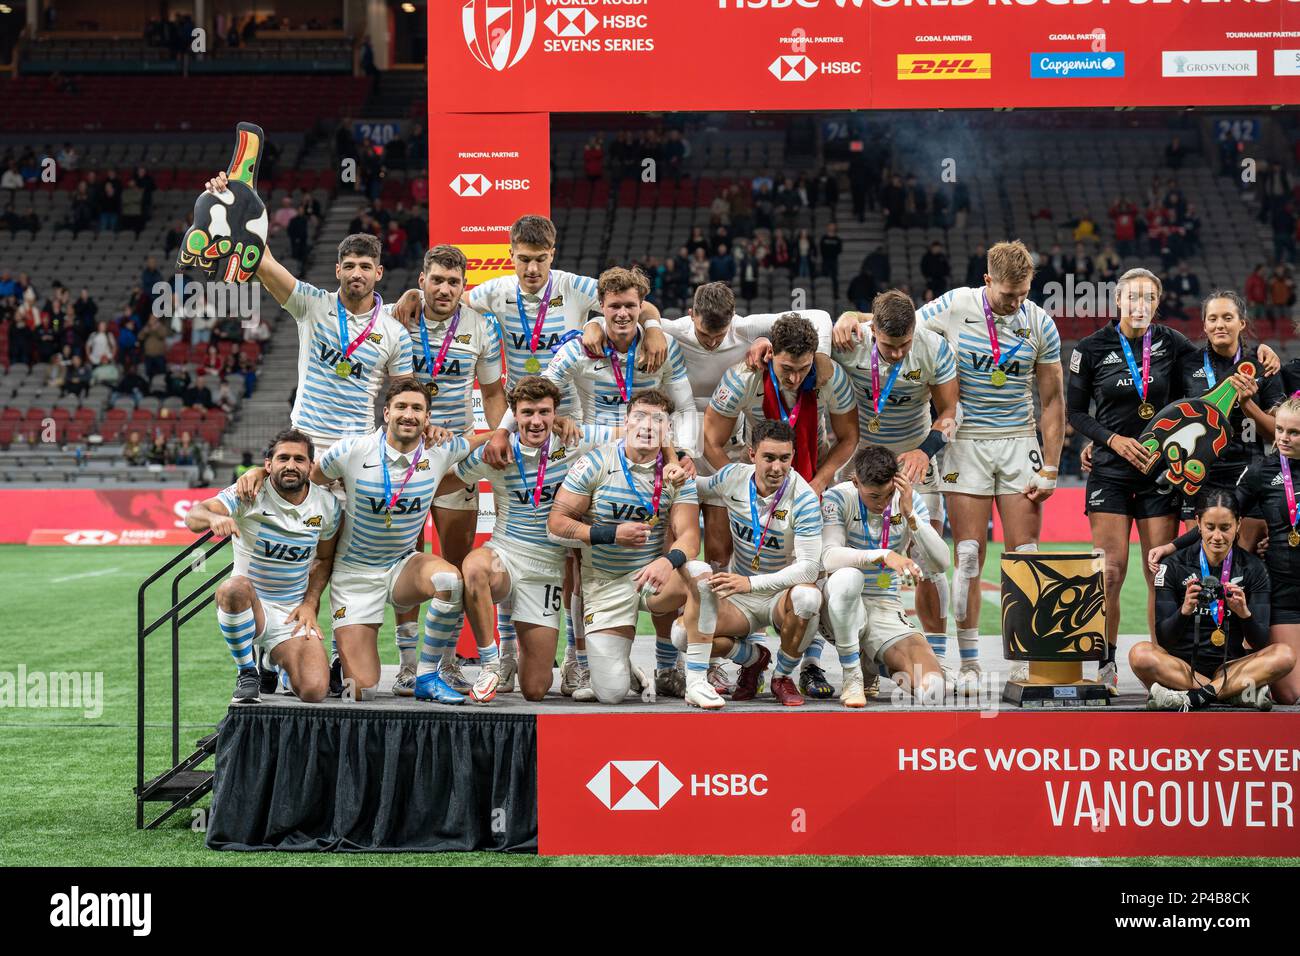 Vancouver, Canada. 5th March, 2023. Mens Gold medallists Argentina's players pose on the podium during the annual HSBC World Rugby Sevens Series tournament at BC Place in Vancouver, Canada. Credit: Joe Ng/Alamy Live News. Stock Photo